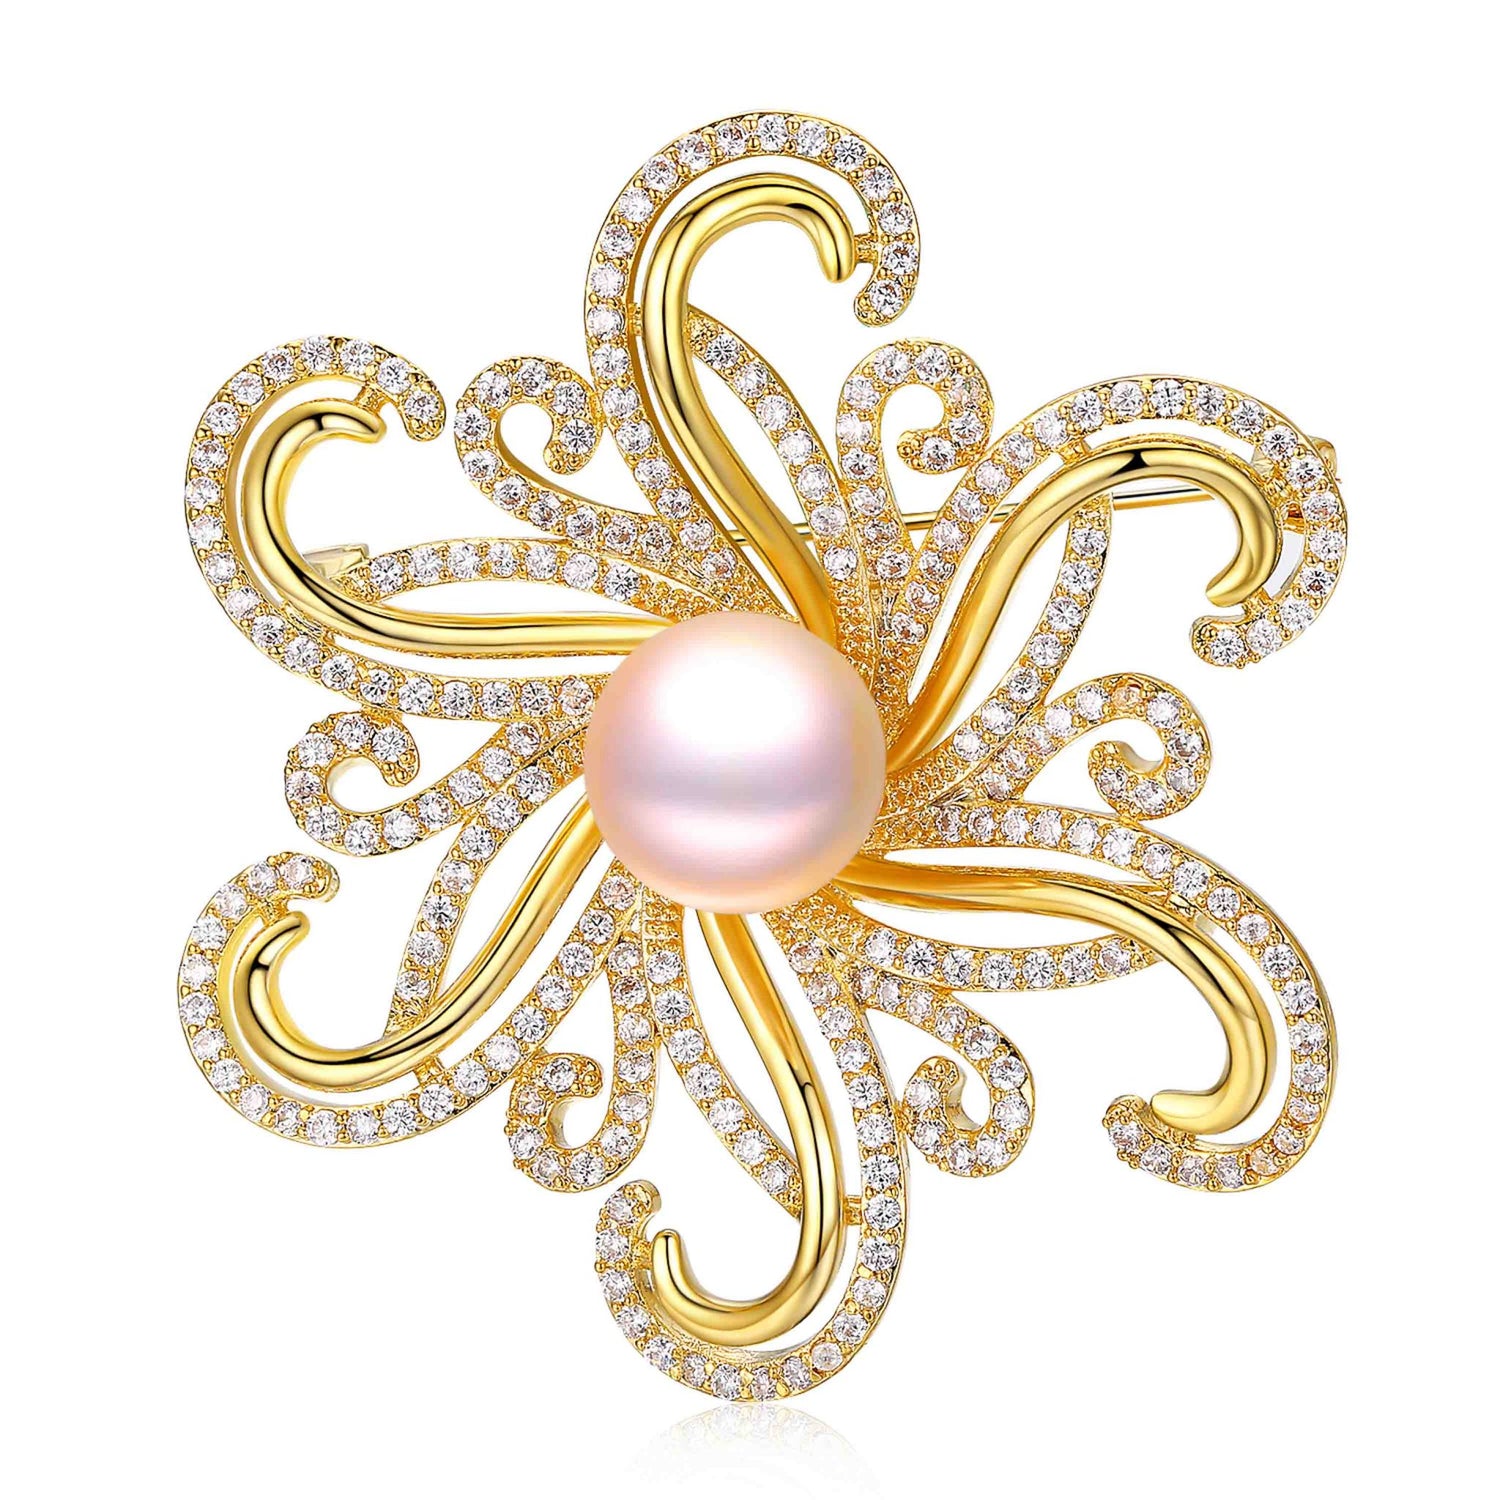 BURNING FLAMES EDISON PEARL BROOCH - Timeless Pearl